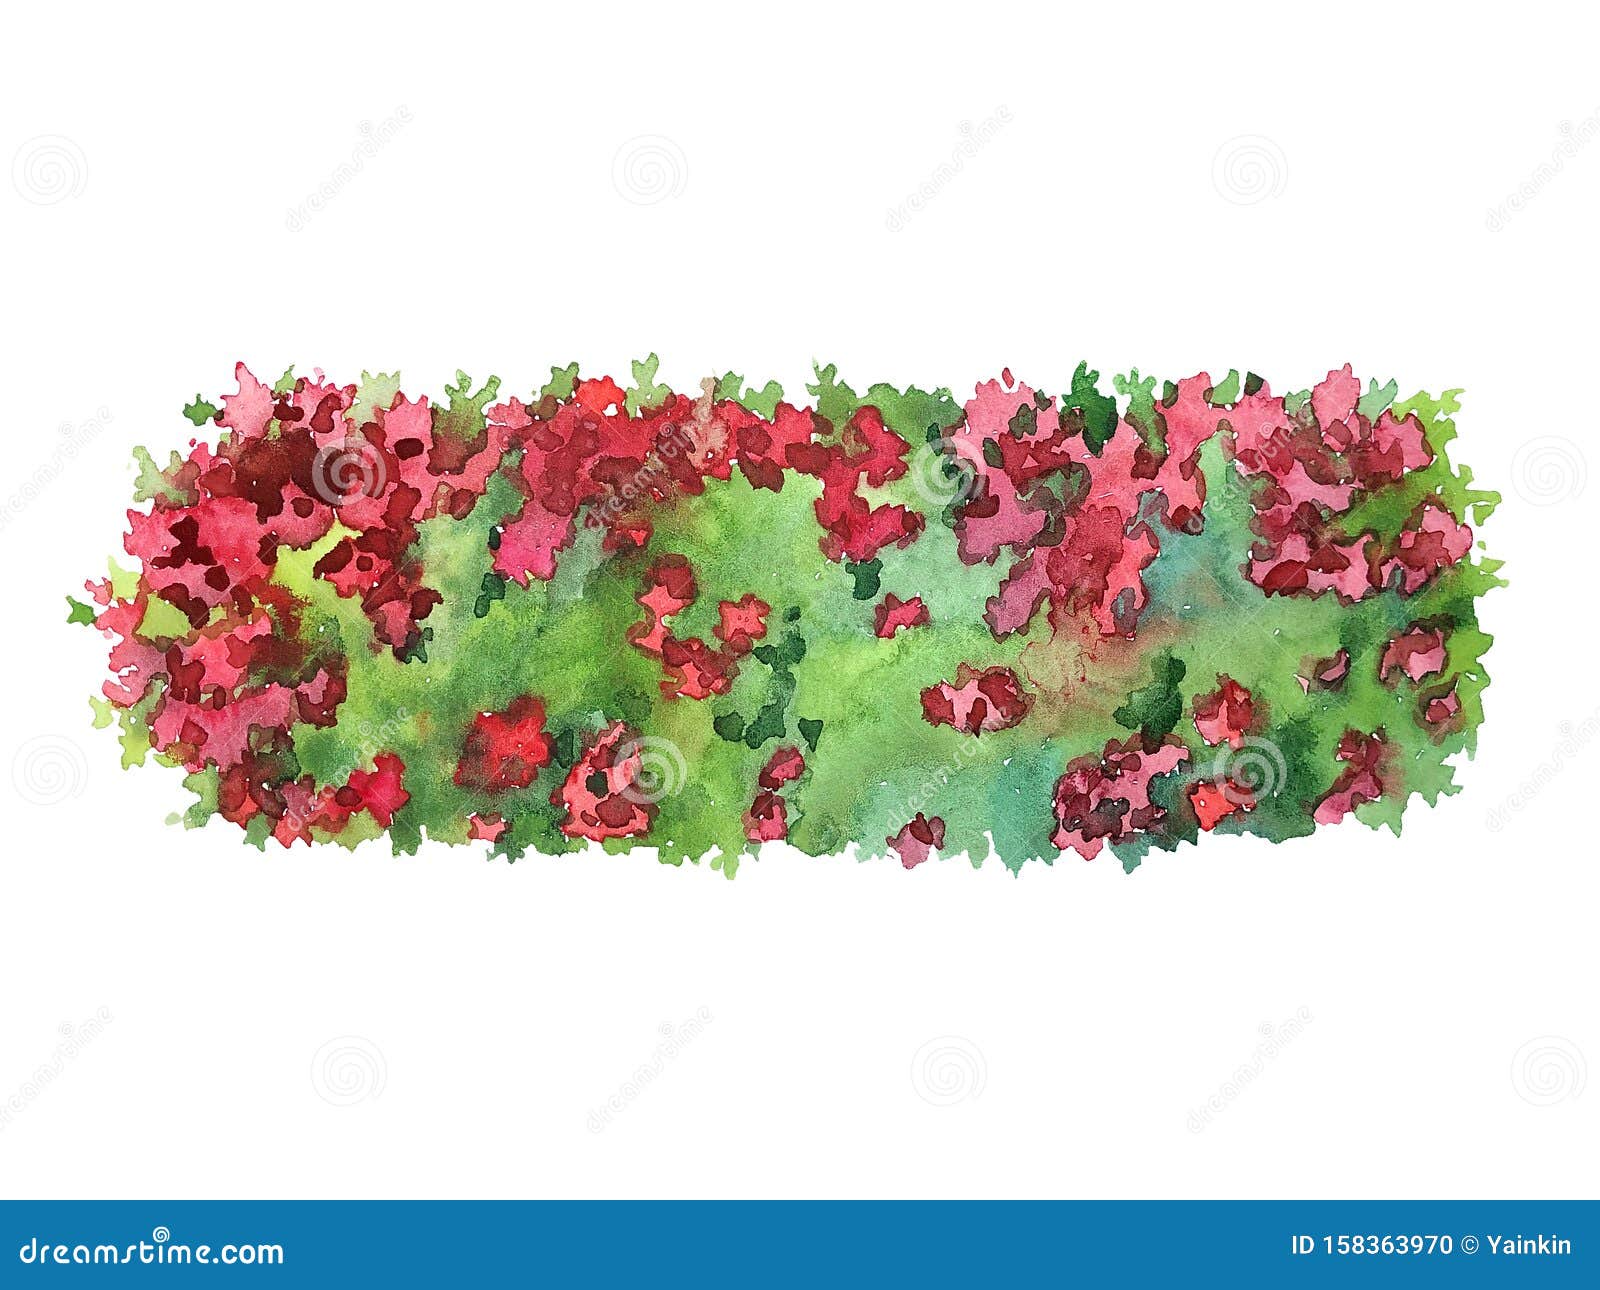 Cartoon Hedge Vector Images (over 1,700)